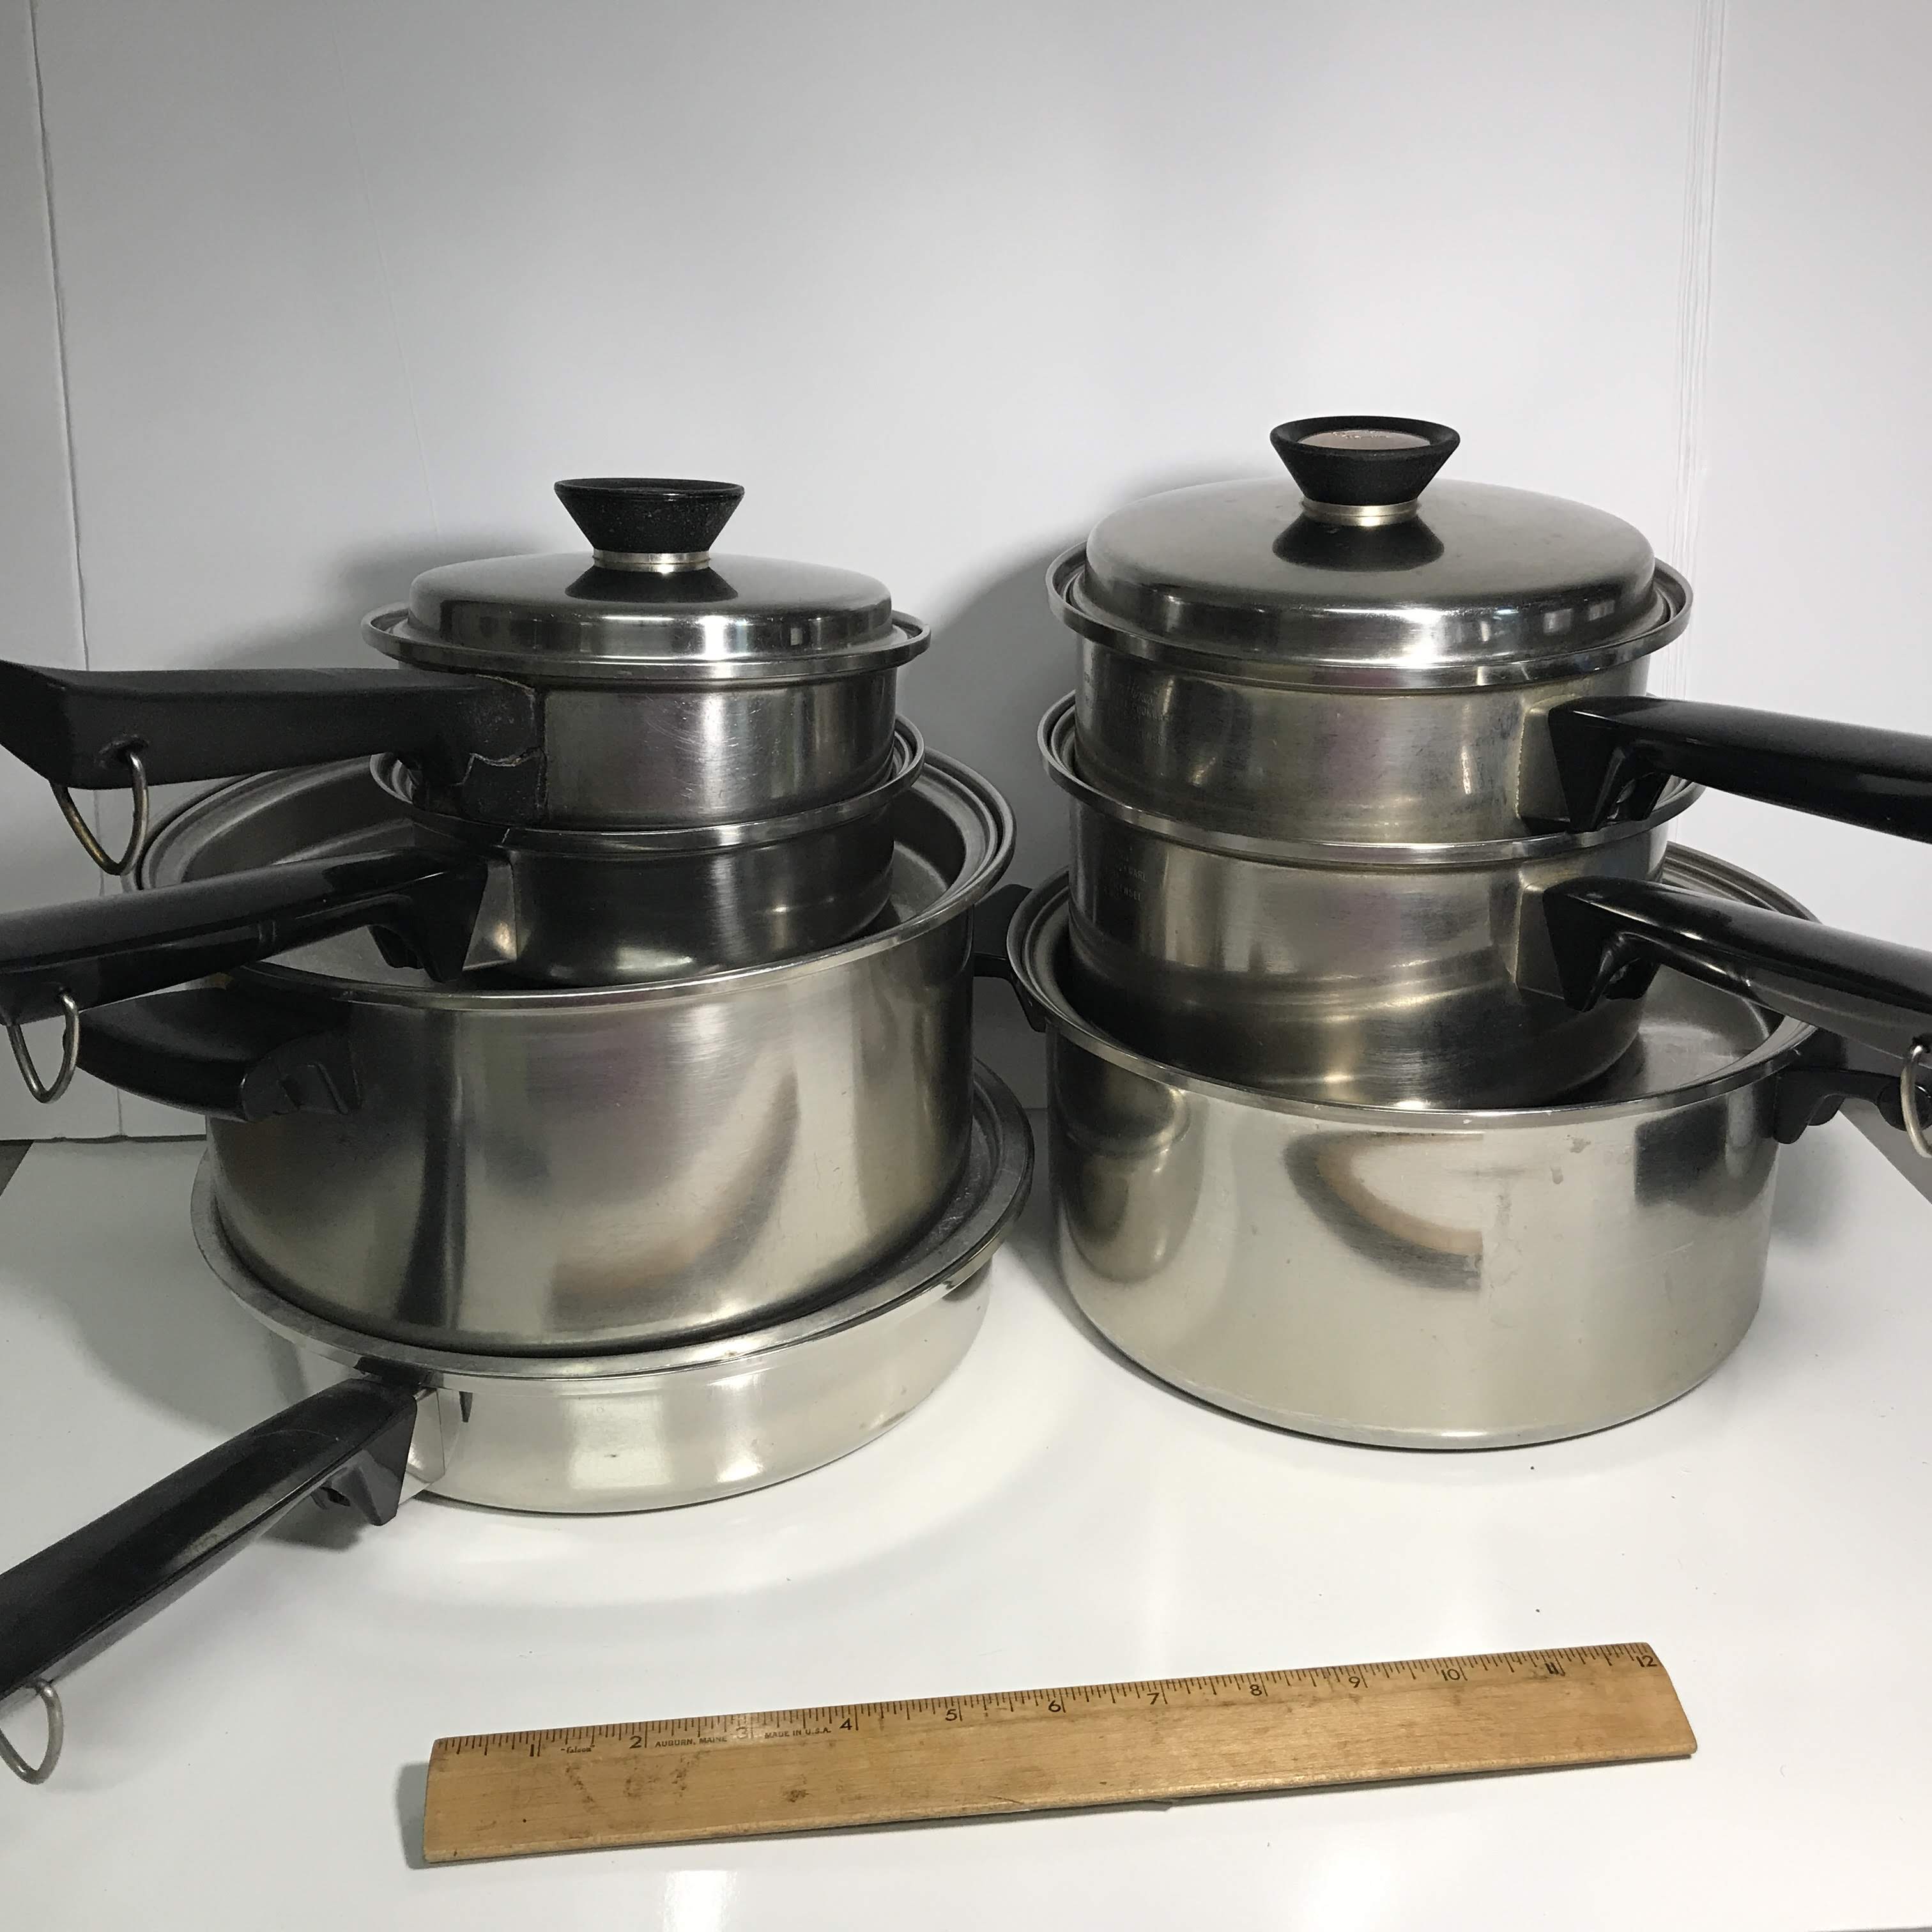 7 pc Vintage Duncan Hines Stainless Steel